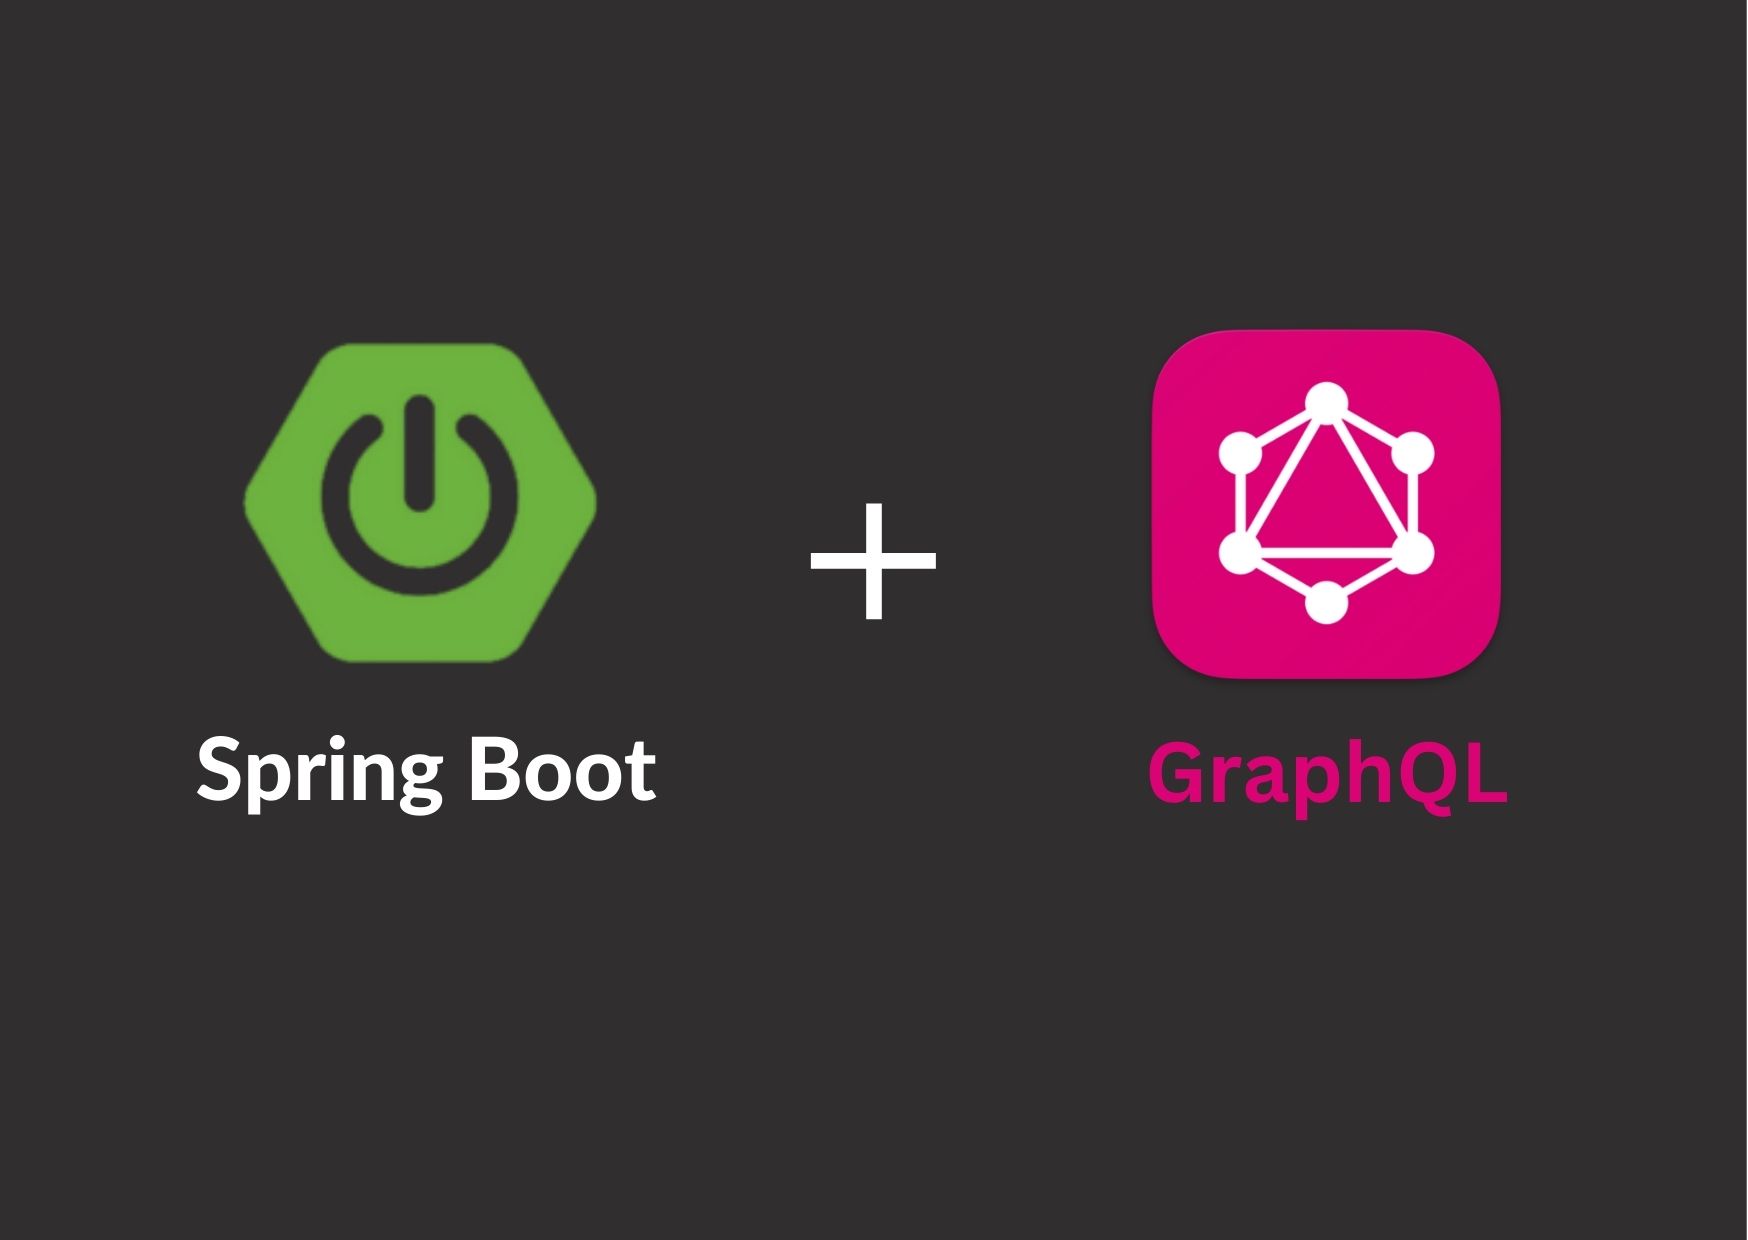 Implementing GraphQL APIs in a Spring Boot Application